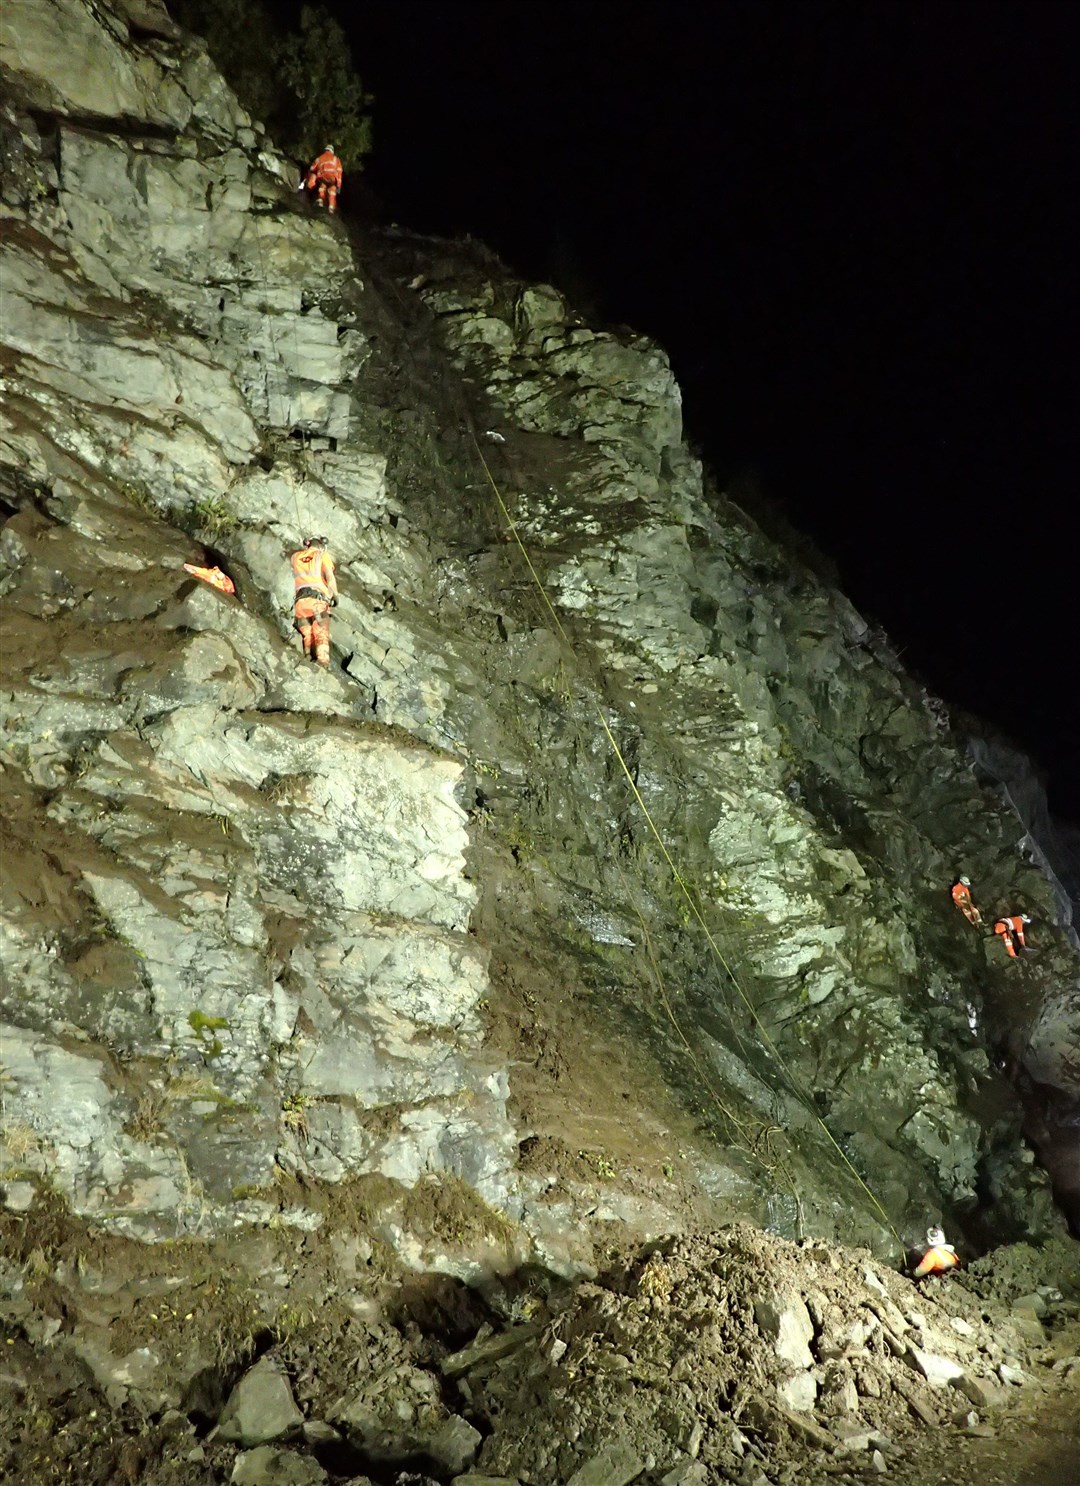 Workers on the rock face during some of last year's night-time works.